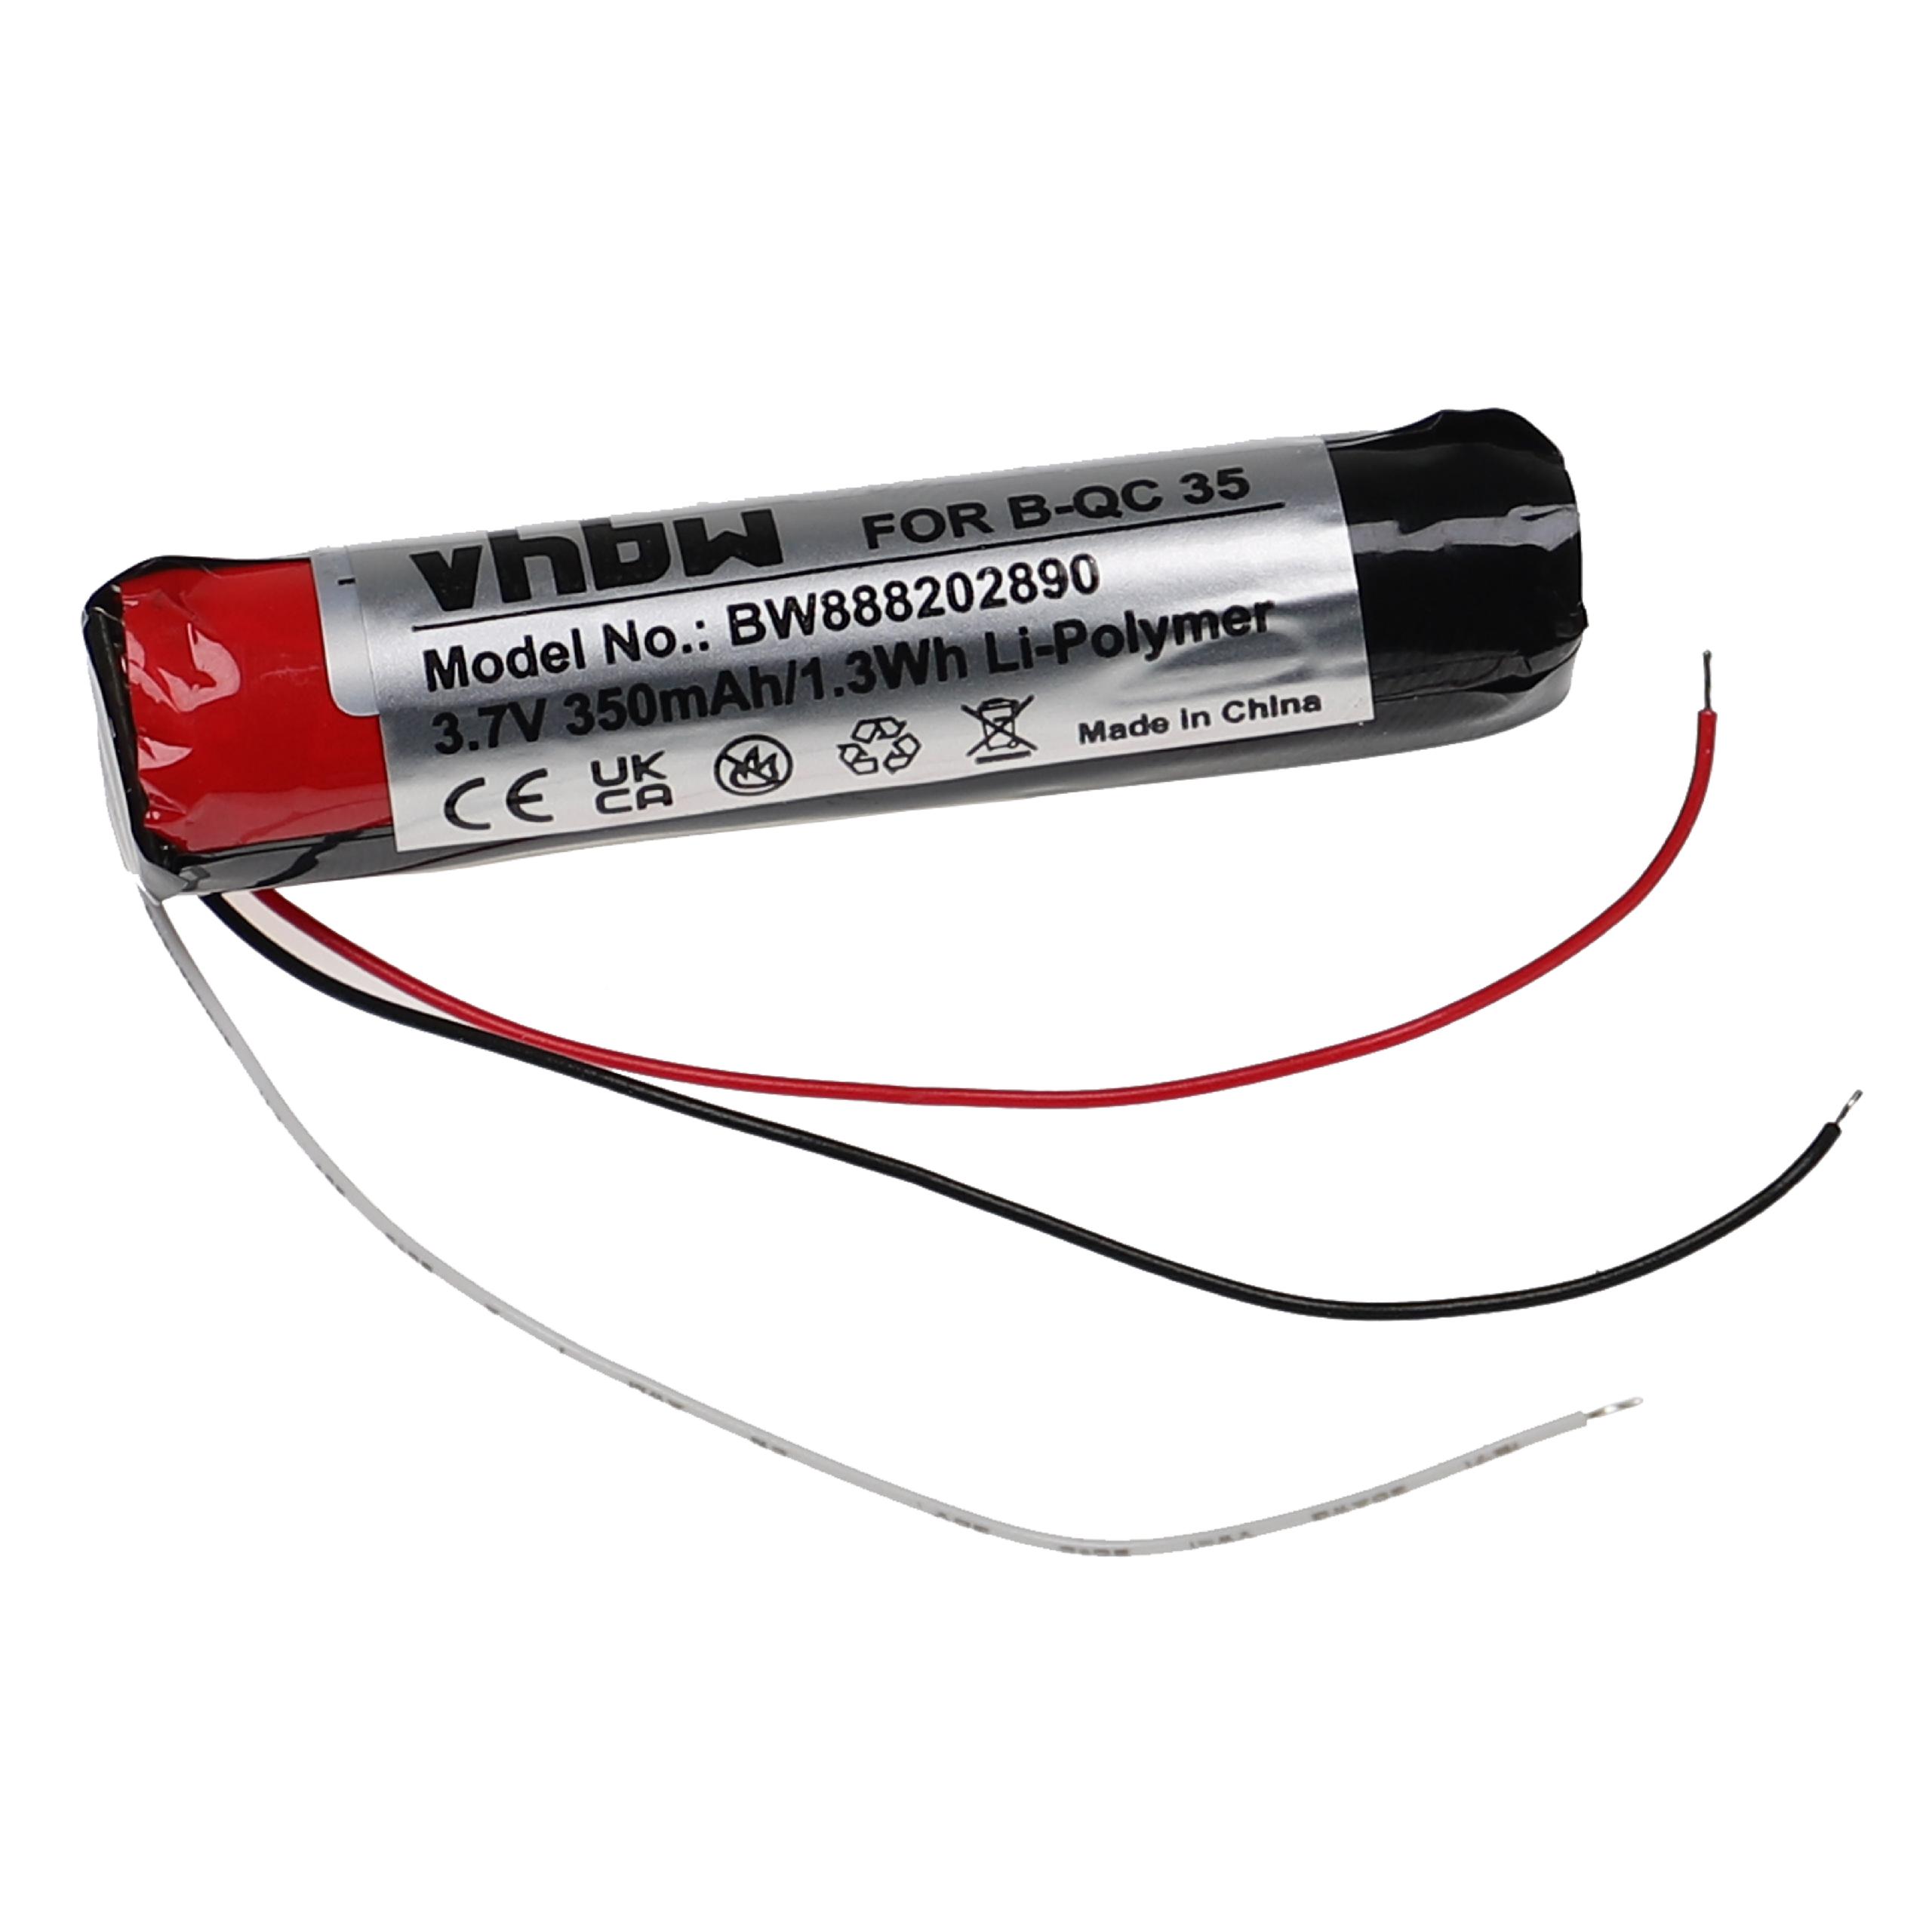 Wireless Headset Battery Replacement for Bose AHB110520CPS - 350mAh 3.7V Li-polymer